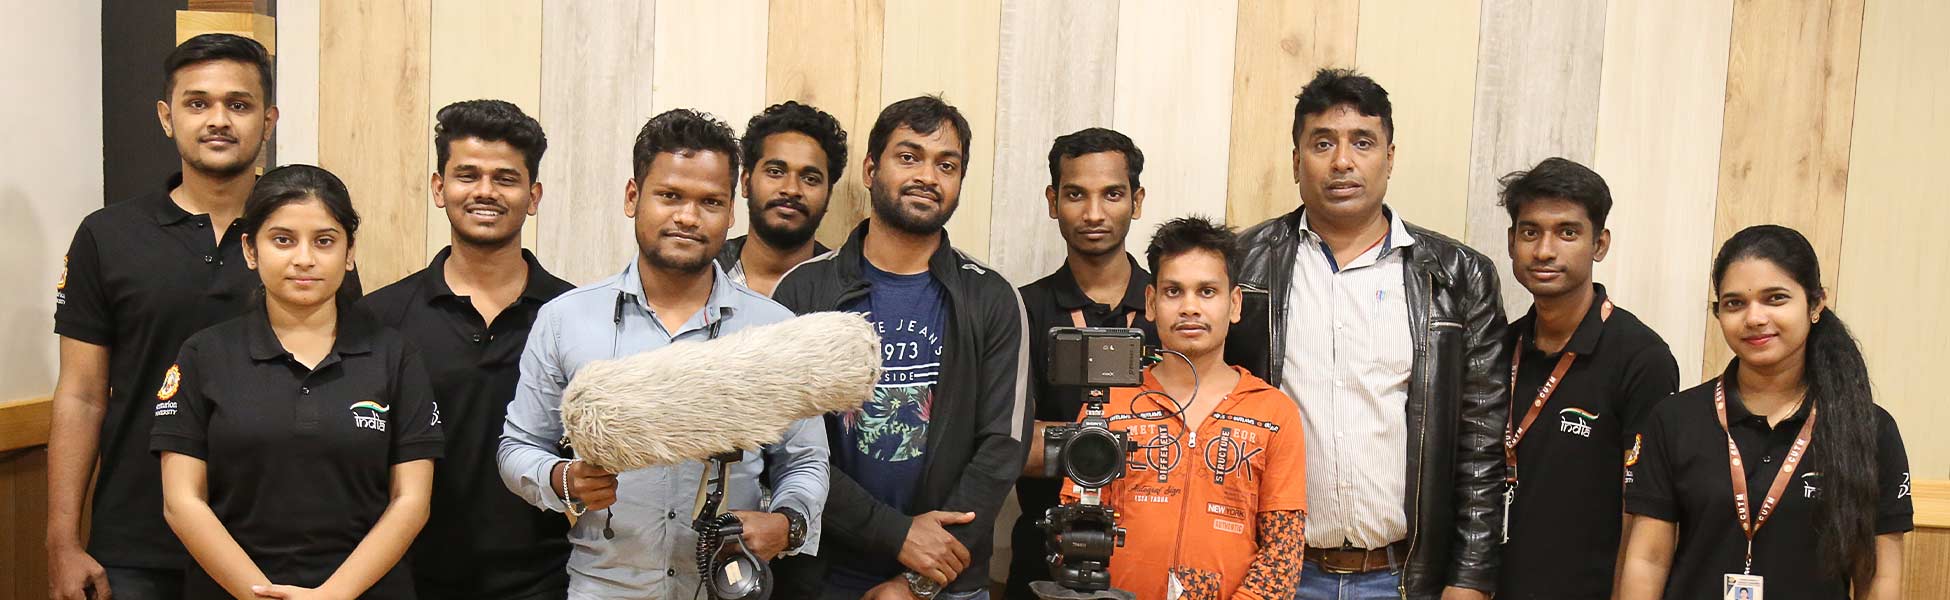 educational film production services in india, educational video production services in india, educational tv production services in india, educational production services in india